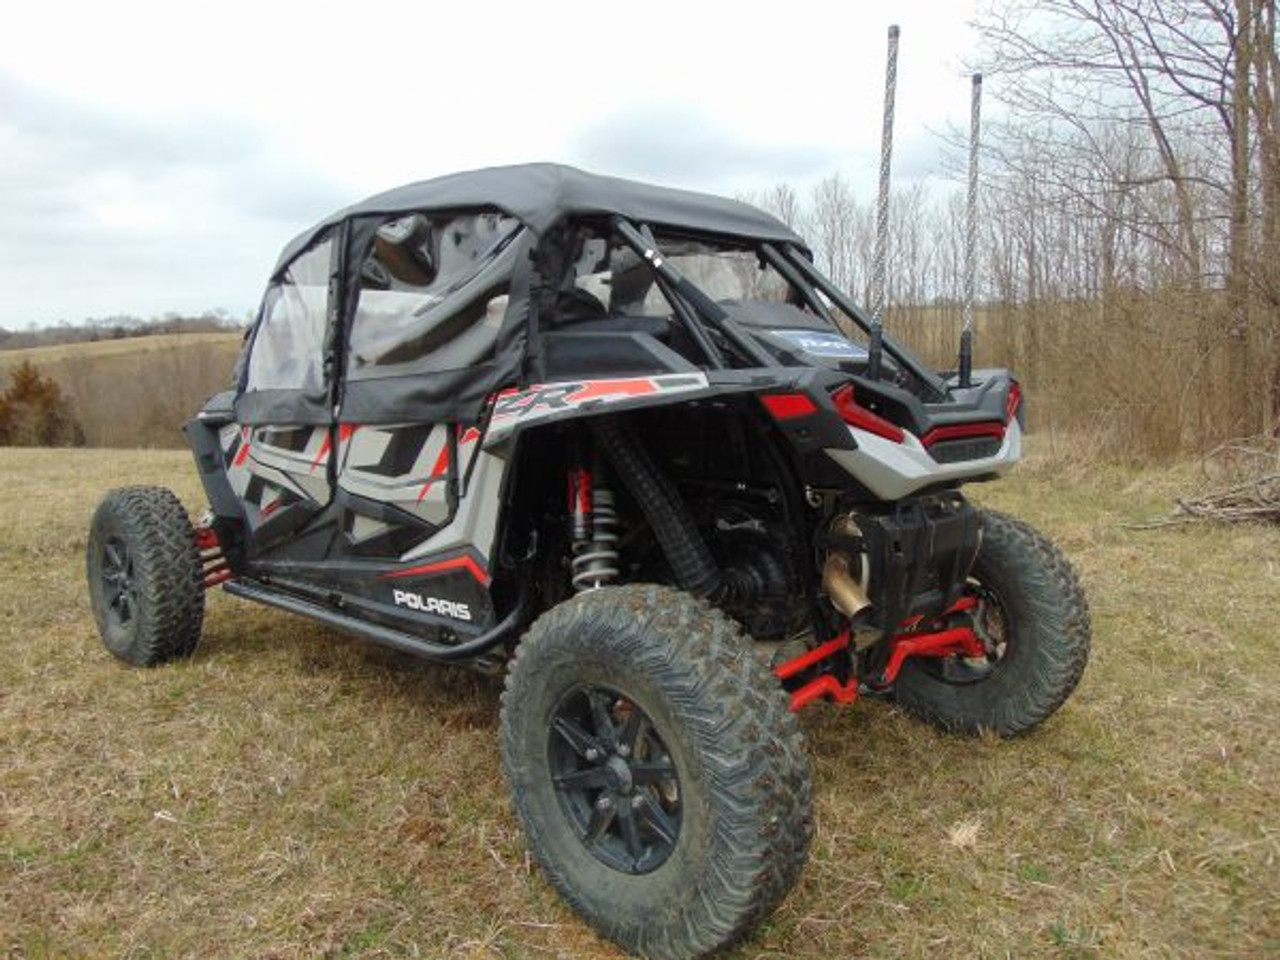 3 Star side x side accessories Polaris RZR XP-4 1000/XP-4 Turbo Full Cab Enclosure for Hard Windshield rear and side angle view